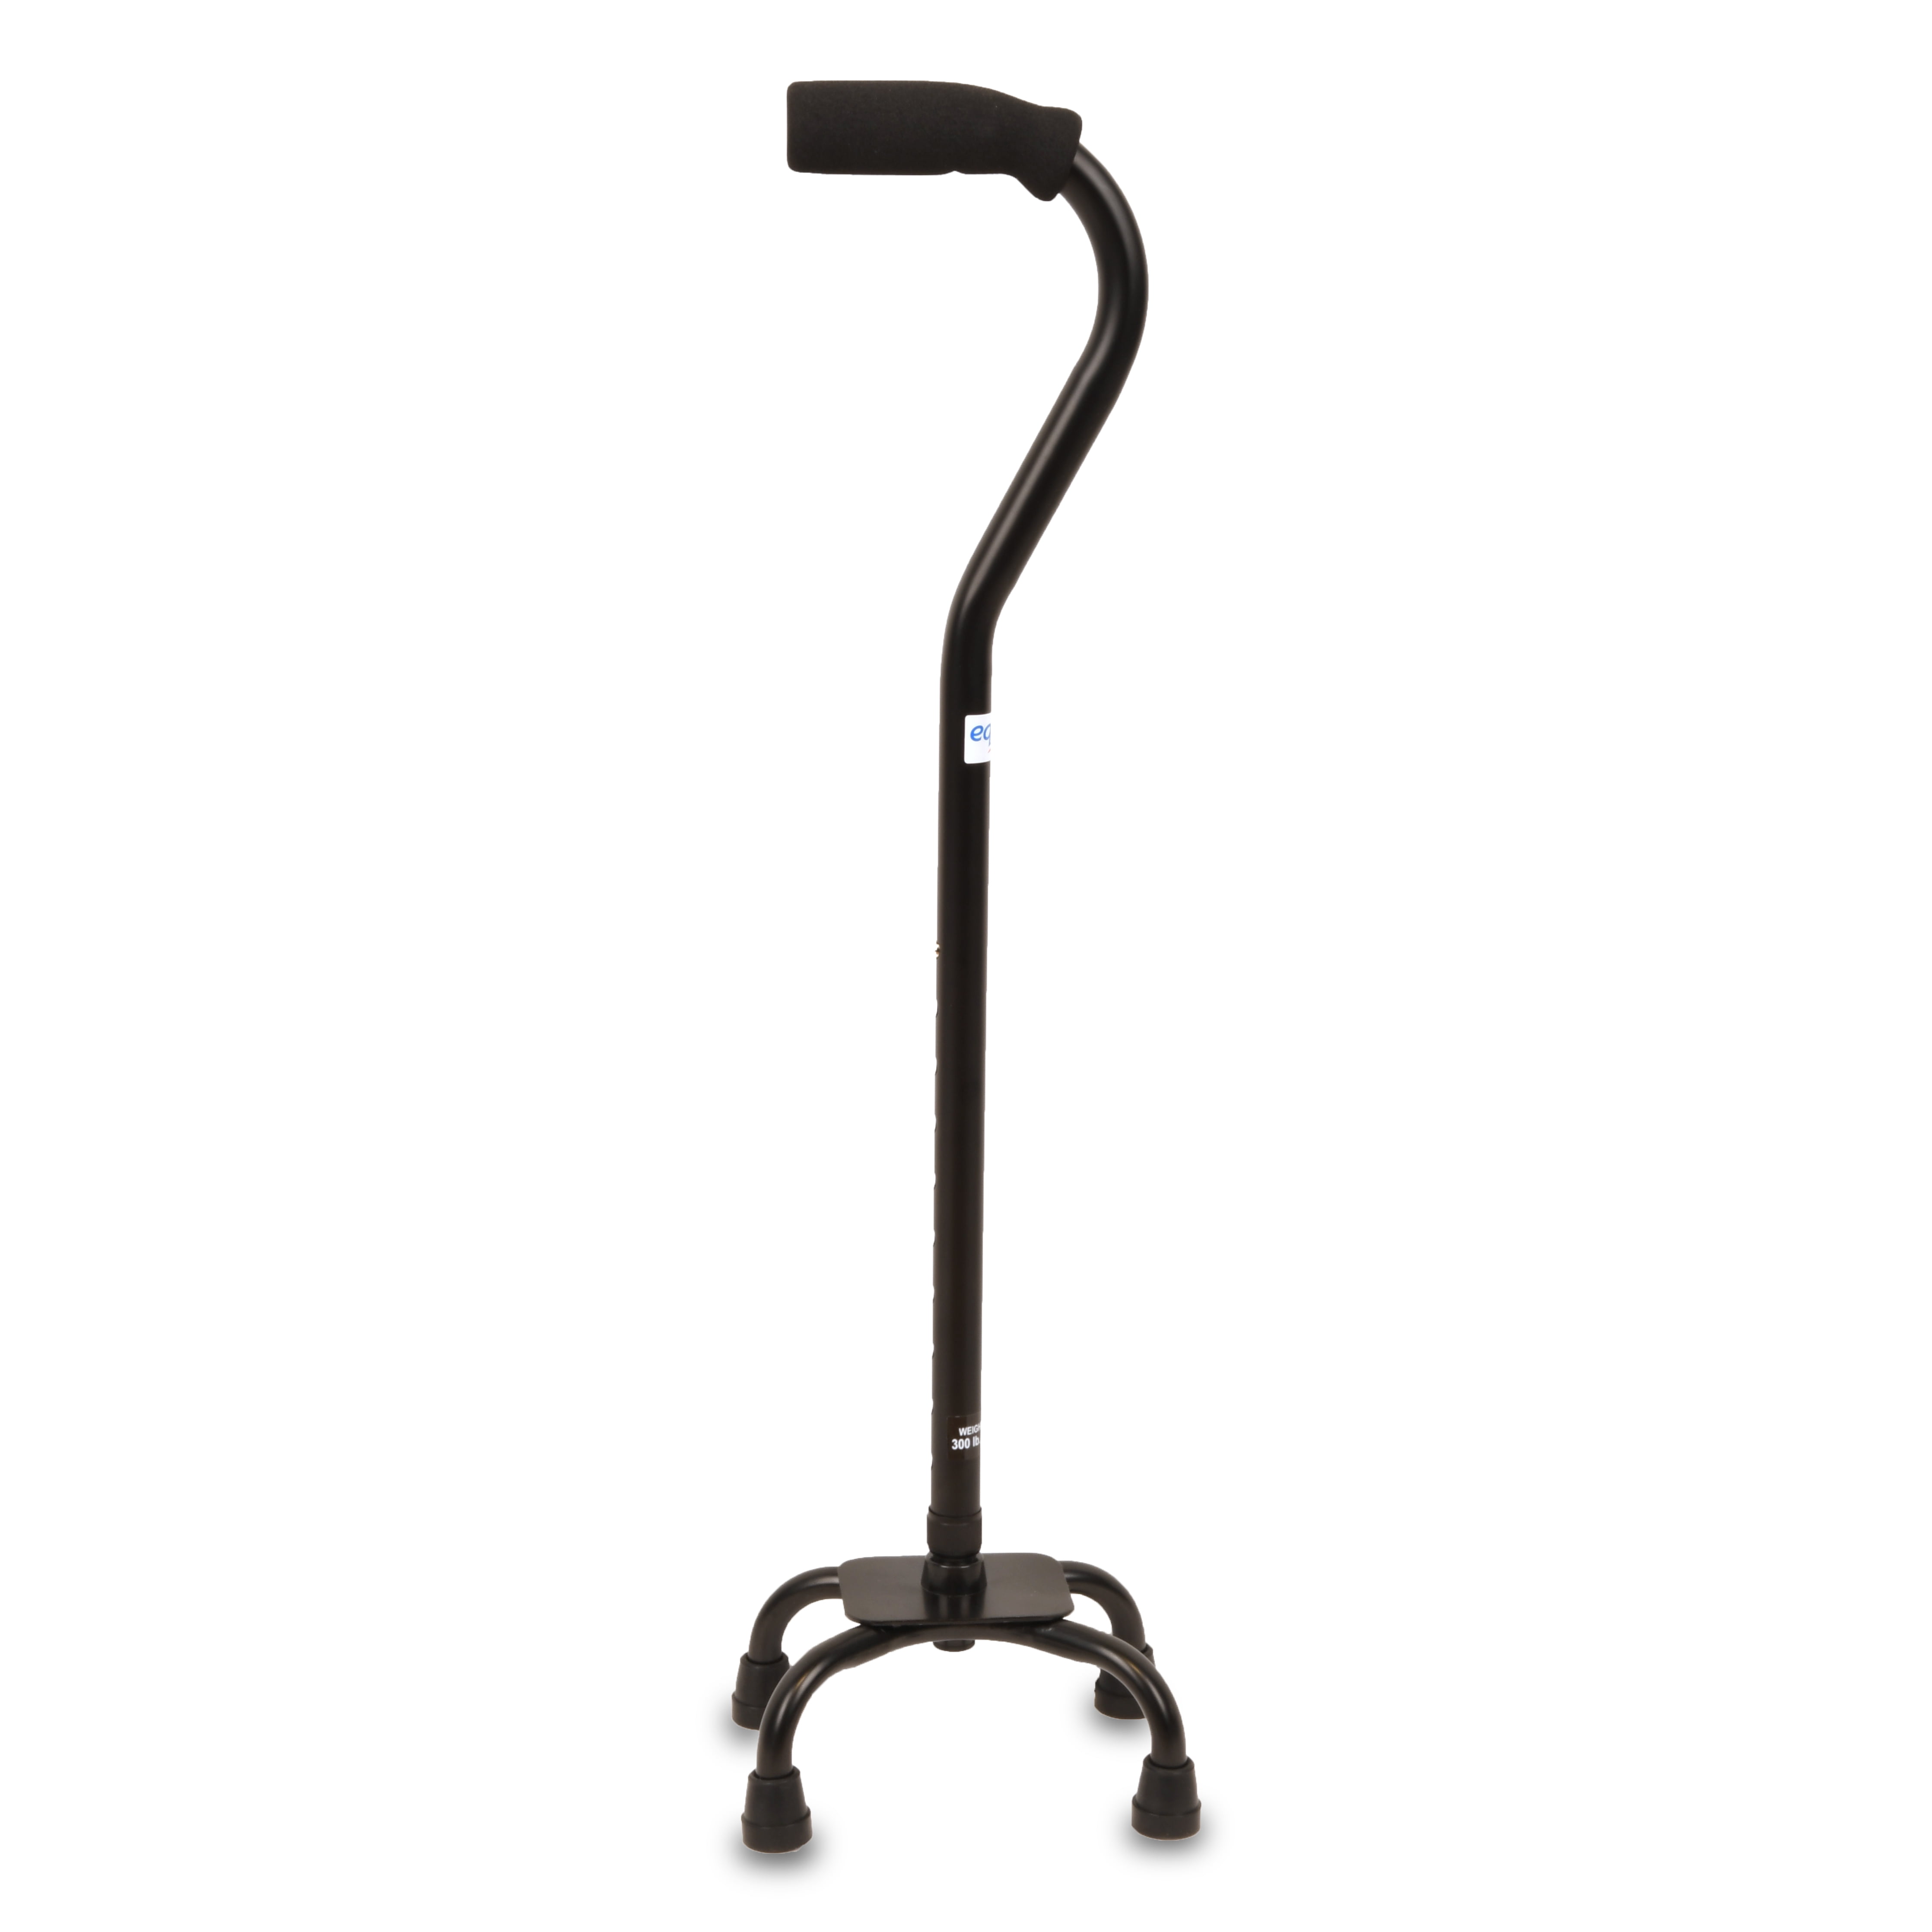 Equate Quad Cane with Small Base, Adjustable Height Quad Cane and Walking Stick with Small Base, Holds Up to 300 Pounds, Black, Universal